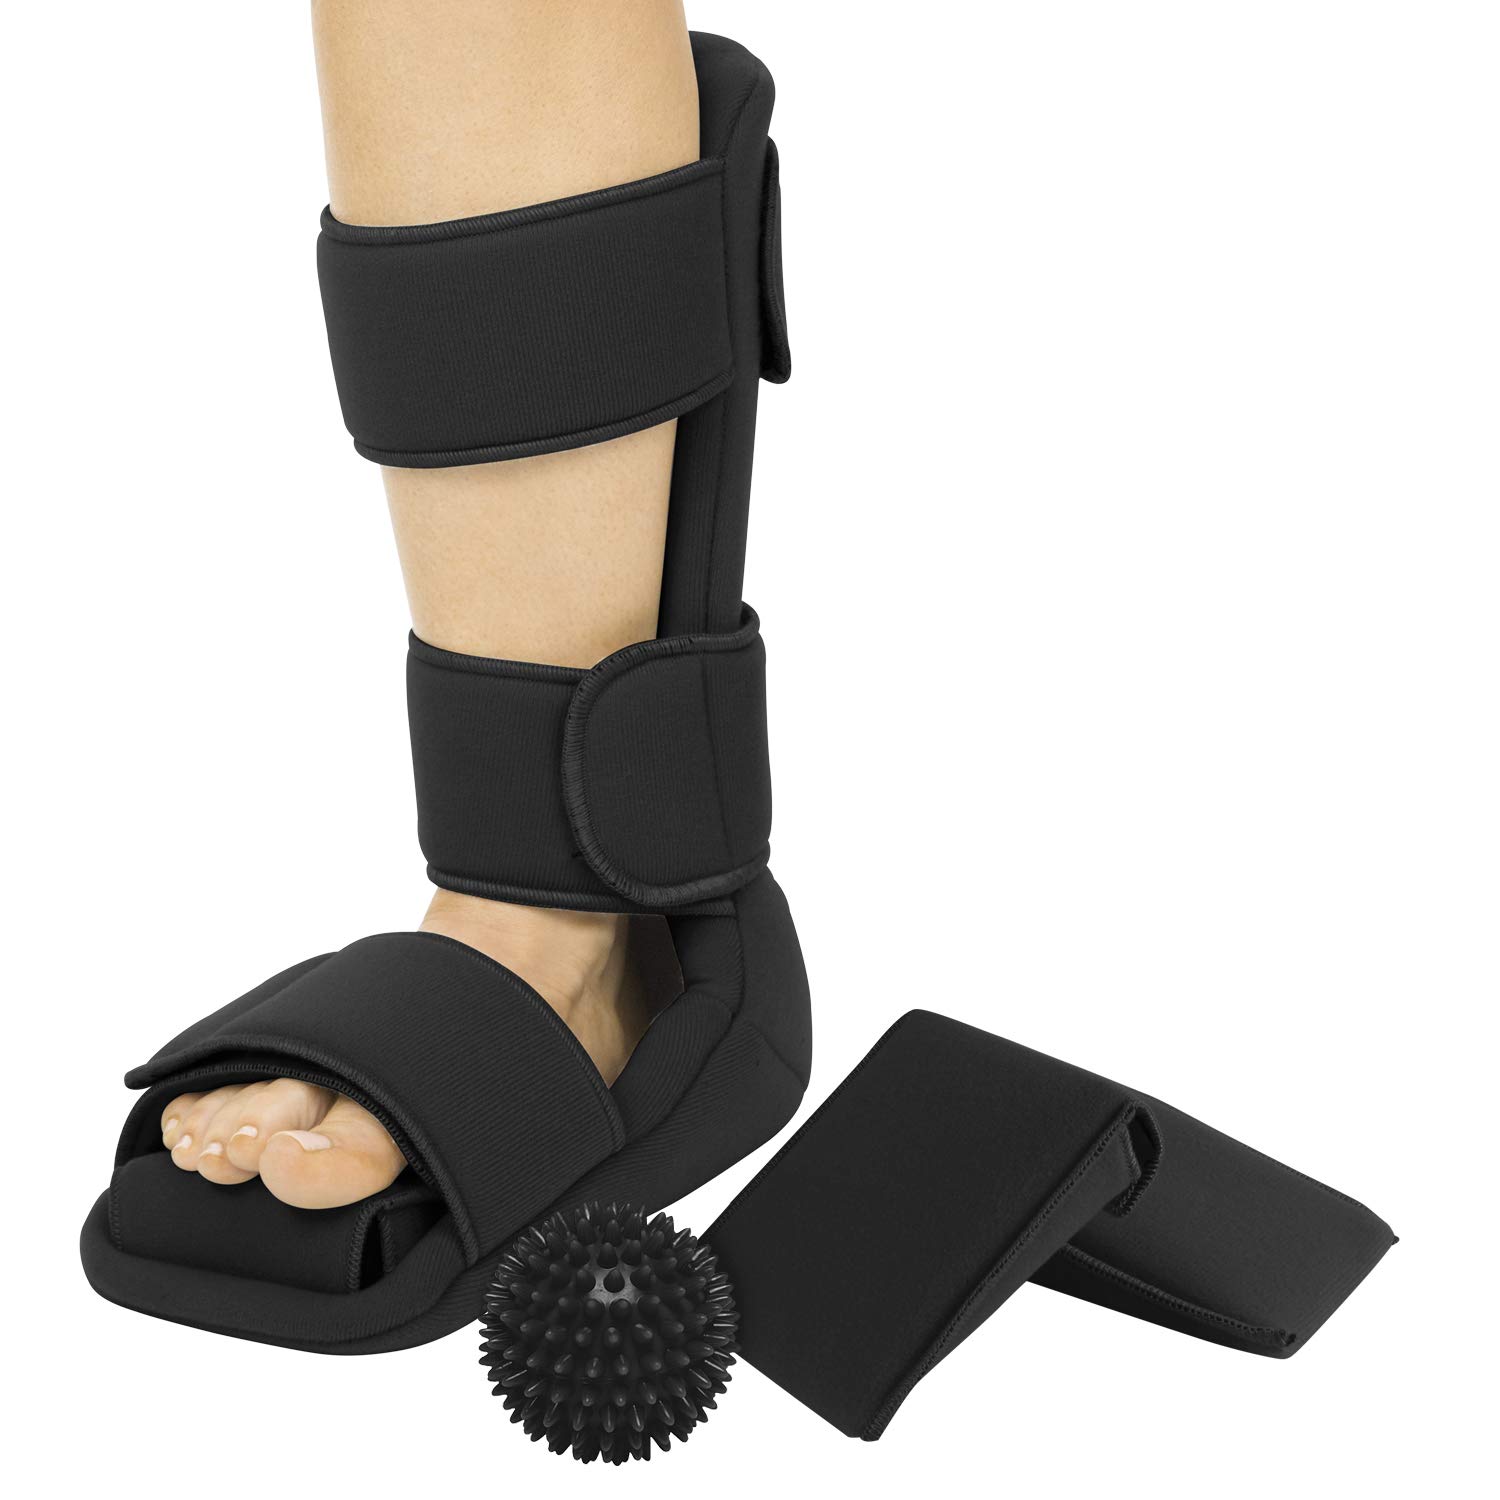 Vive Hard Plantar Fasciitis Night Splint and Trigger Point Spike -  Stabilizer Brace Relieves Inflammation - Foot Support Boot Features  Adjustable Hook